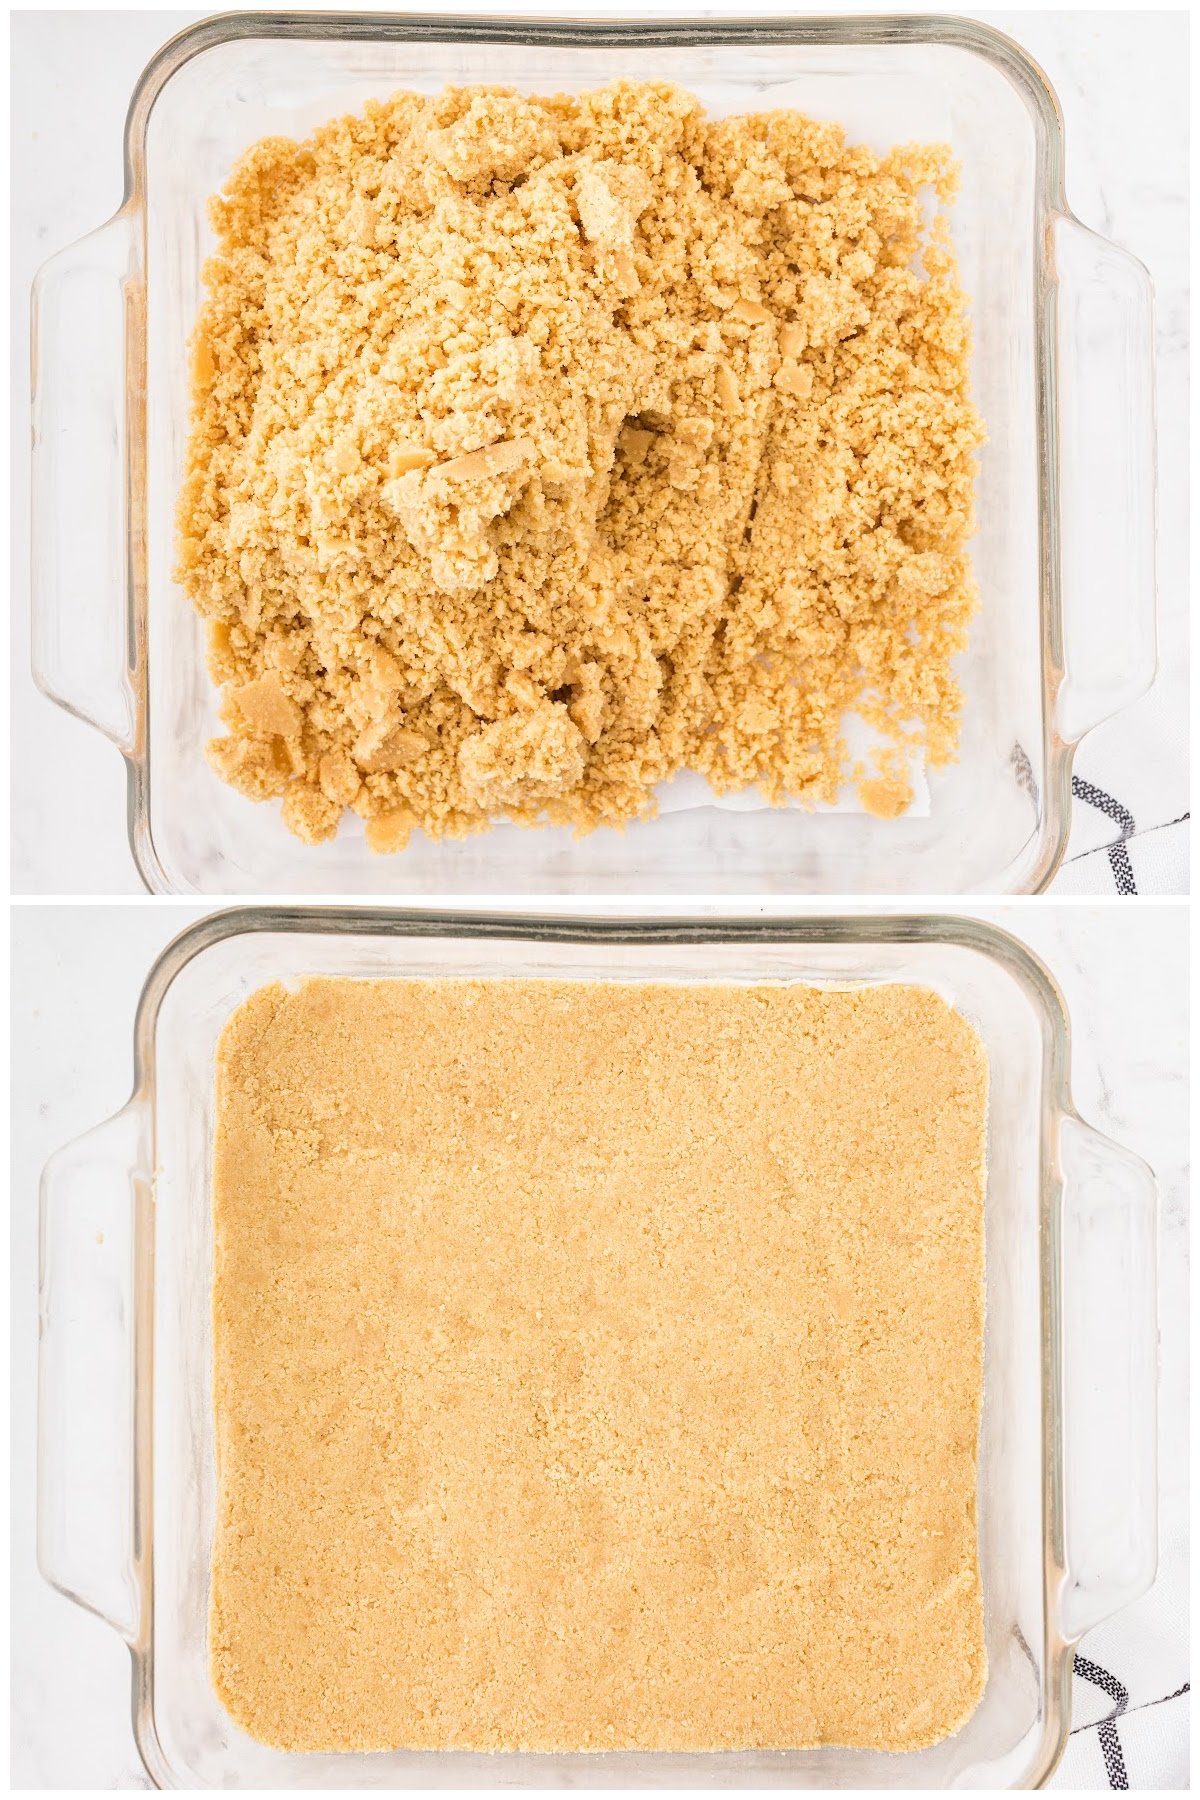 Two steps shown here, pouring the cookie crust into a baking dish and forming it.